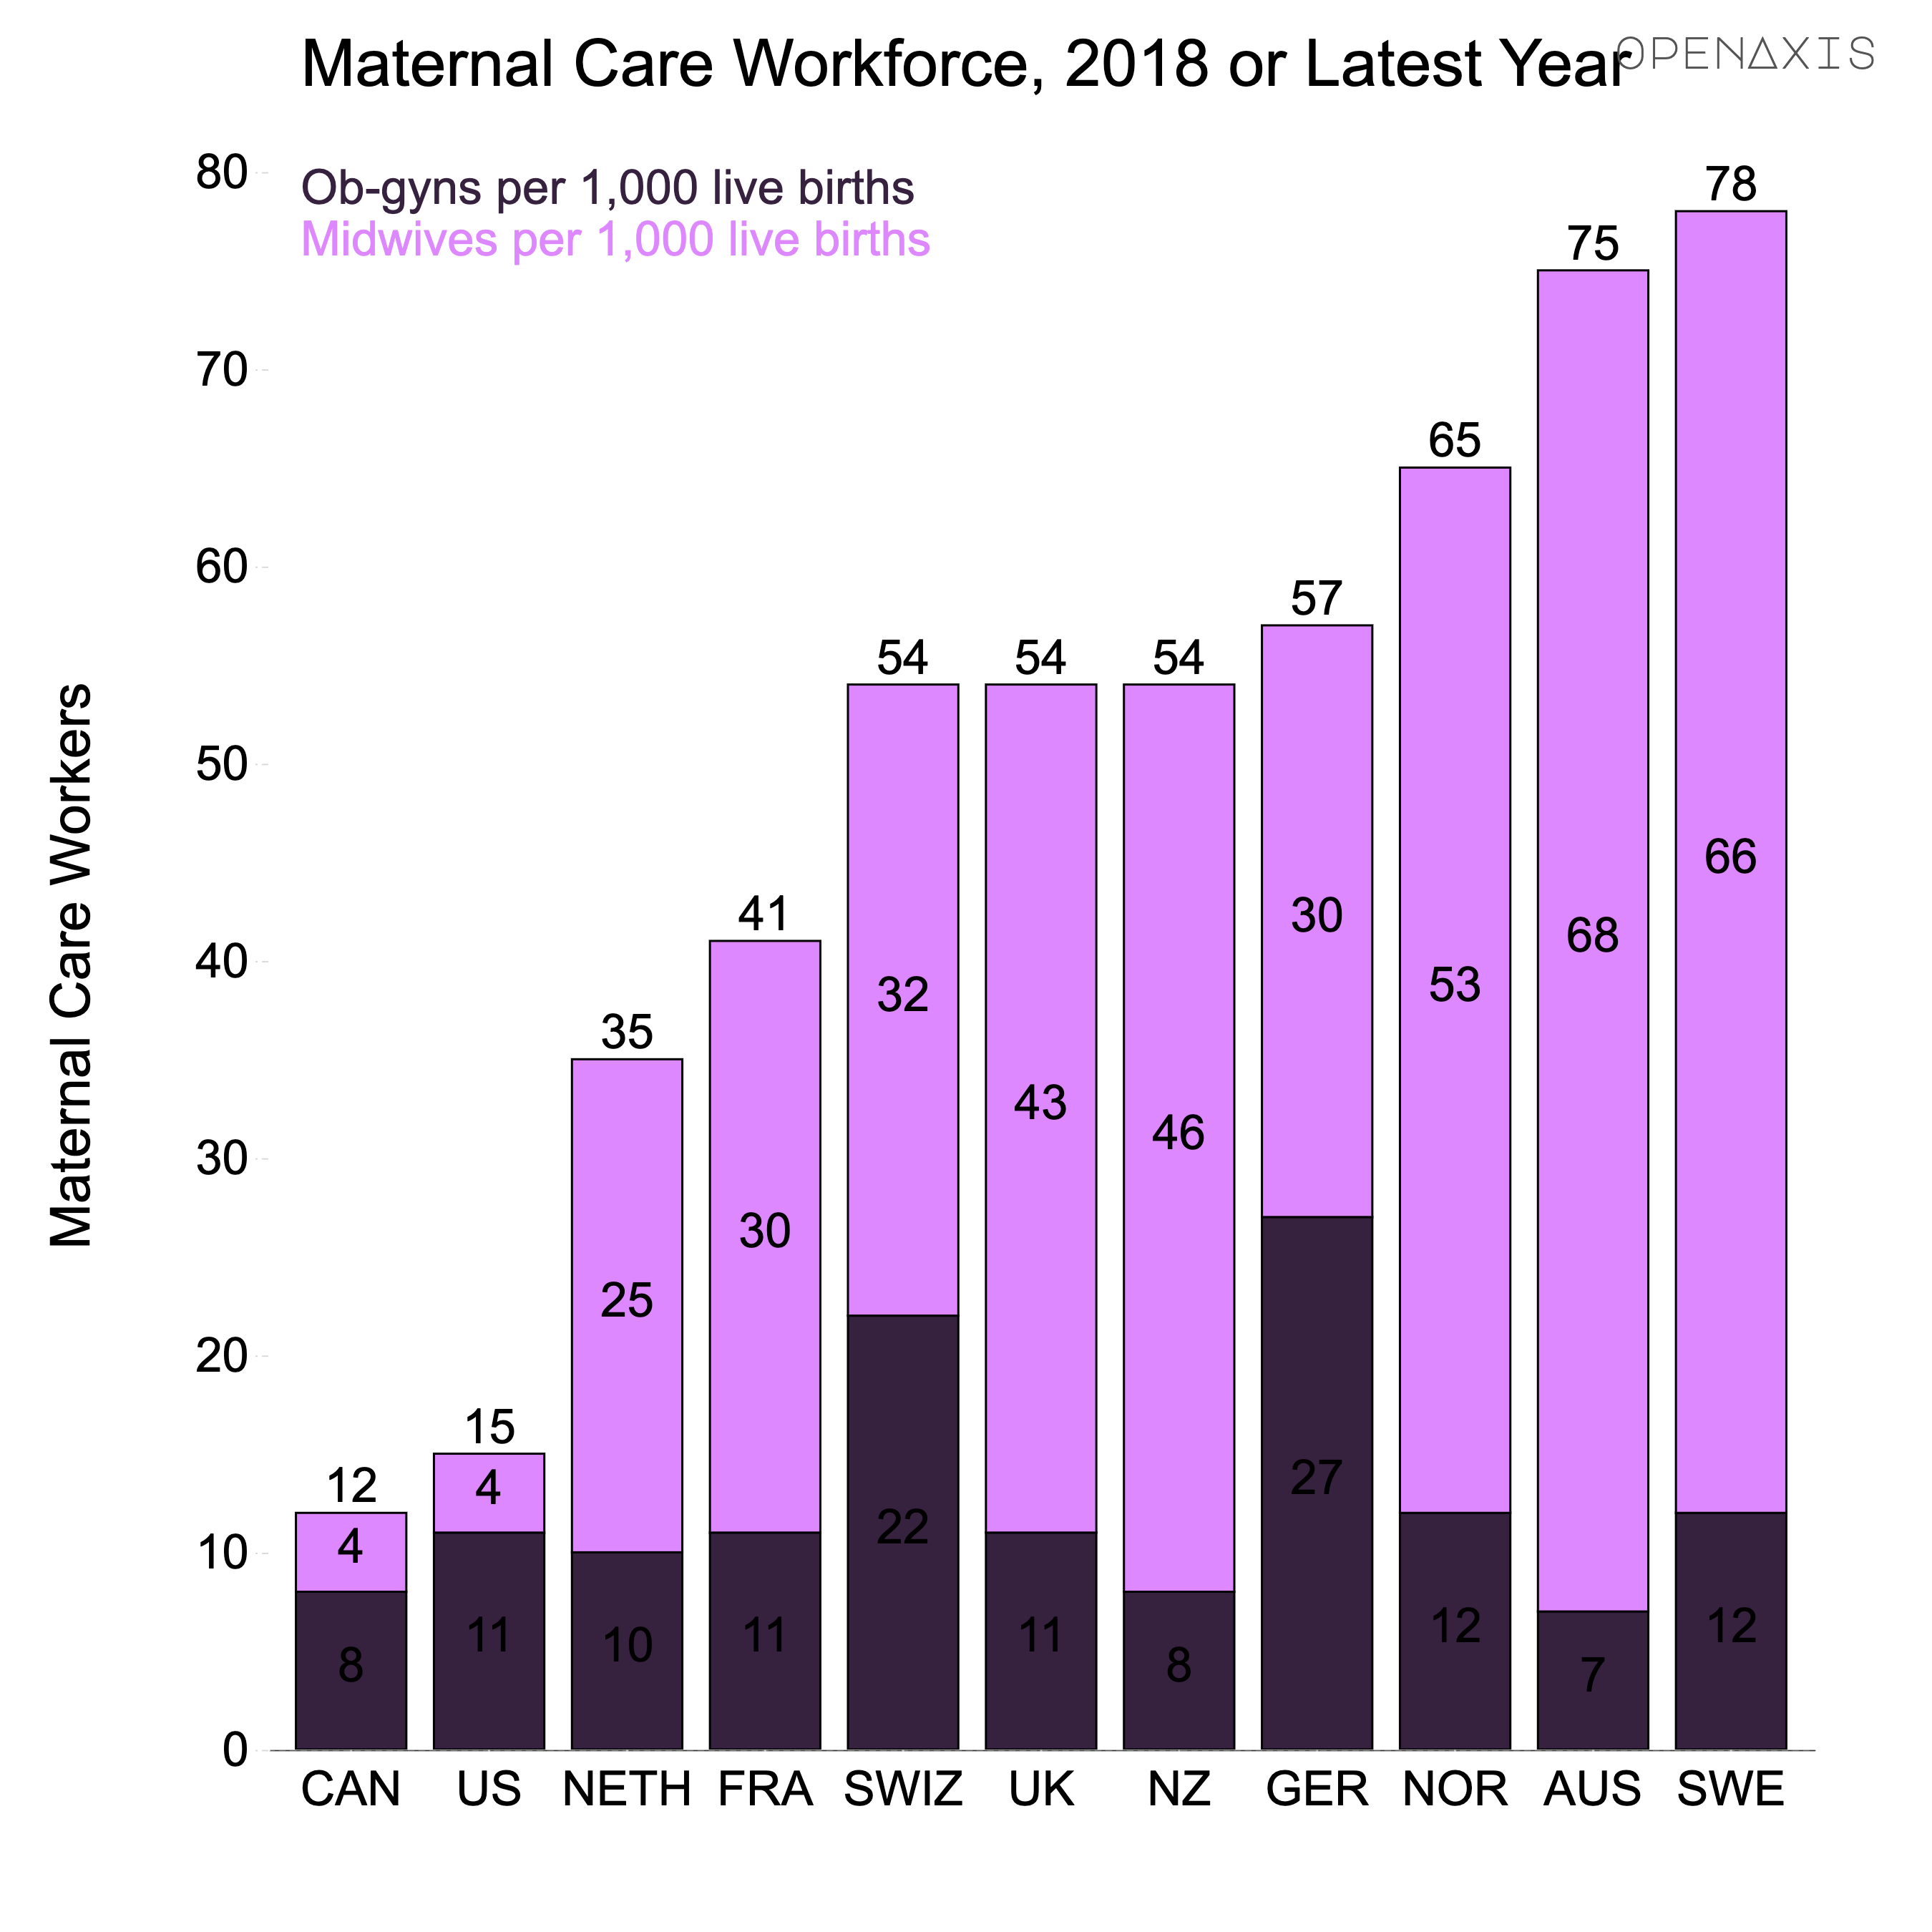 "Maternal Care Workforce, 2018 or Latest Year"